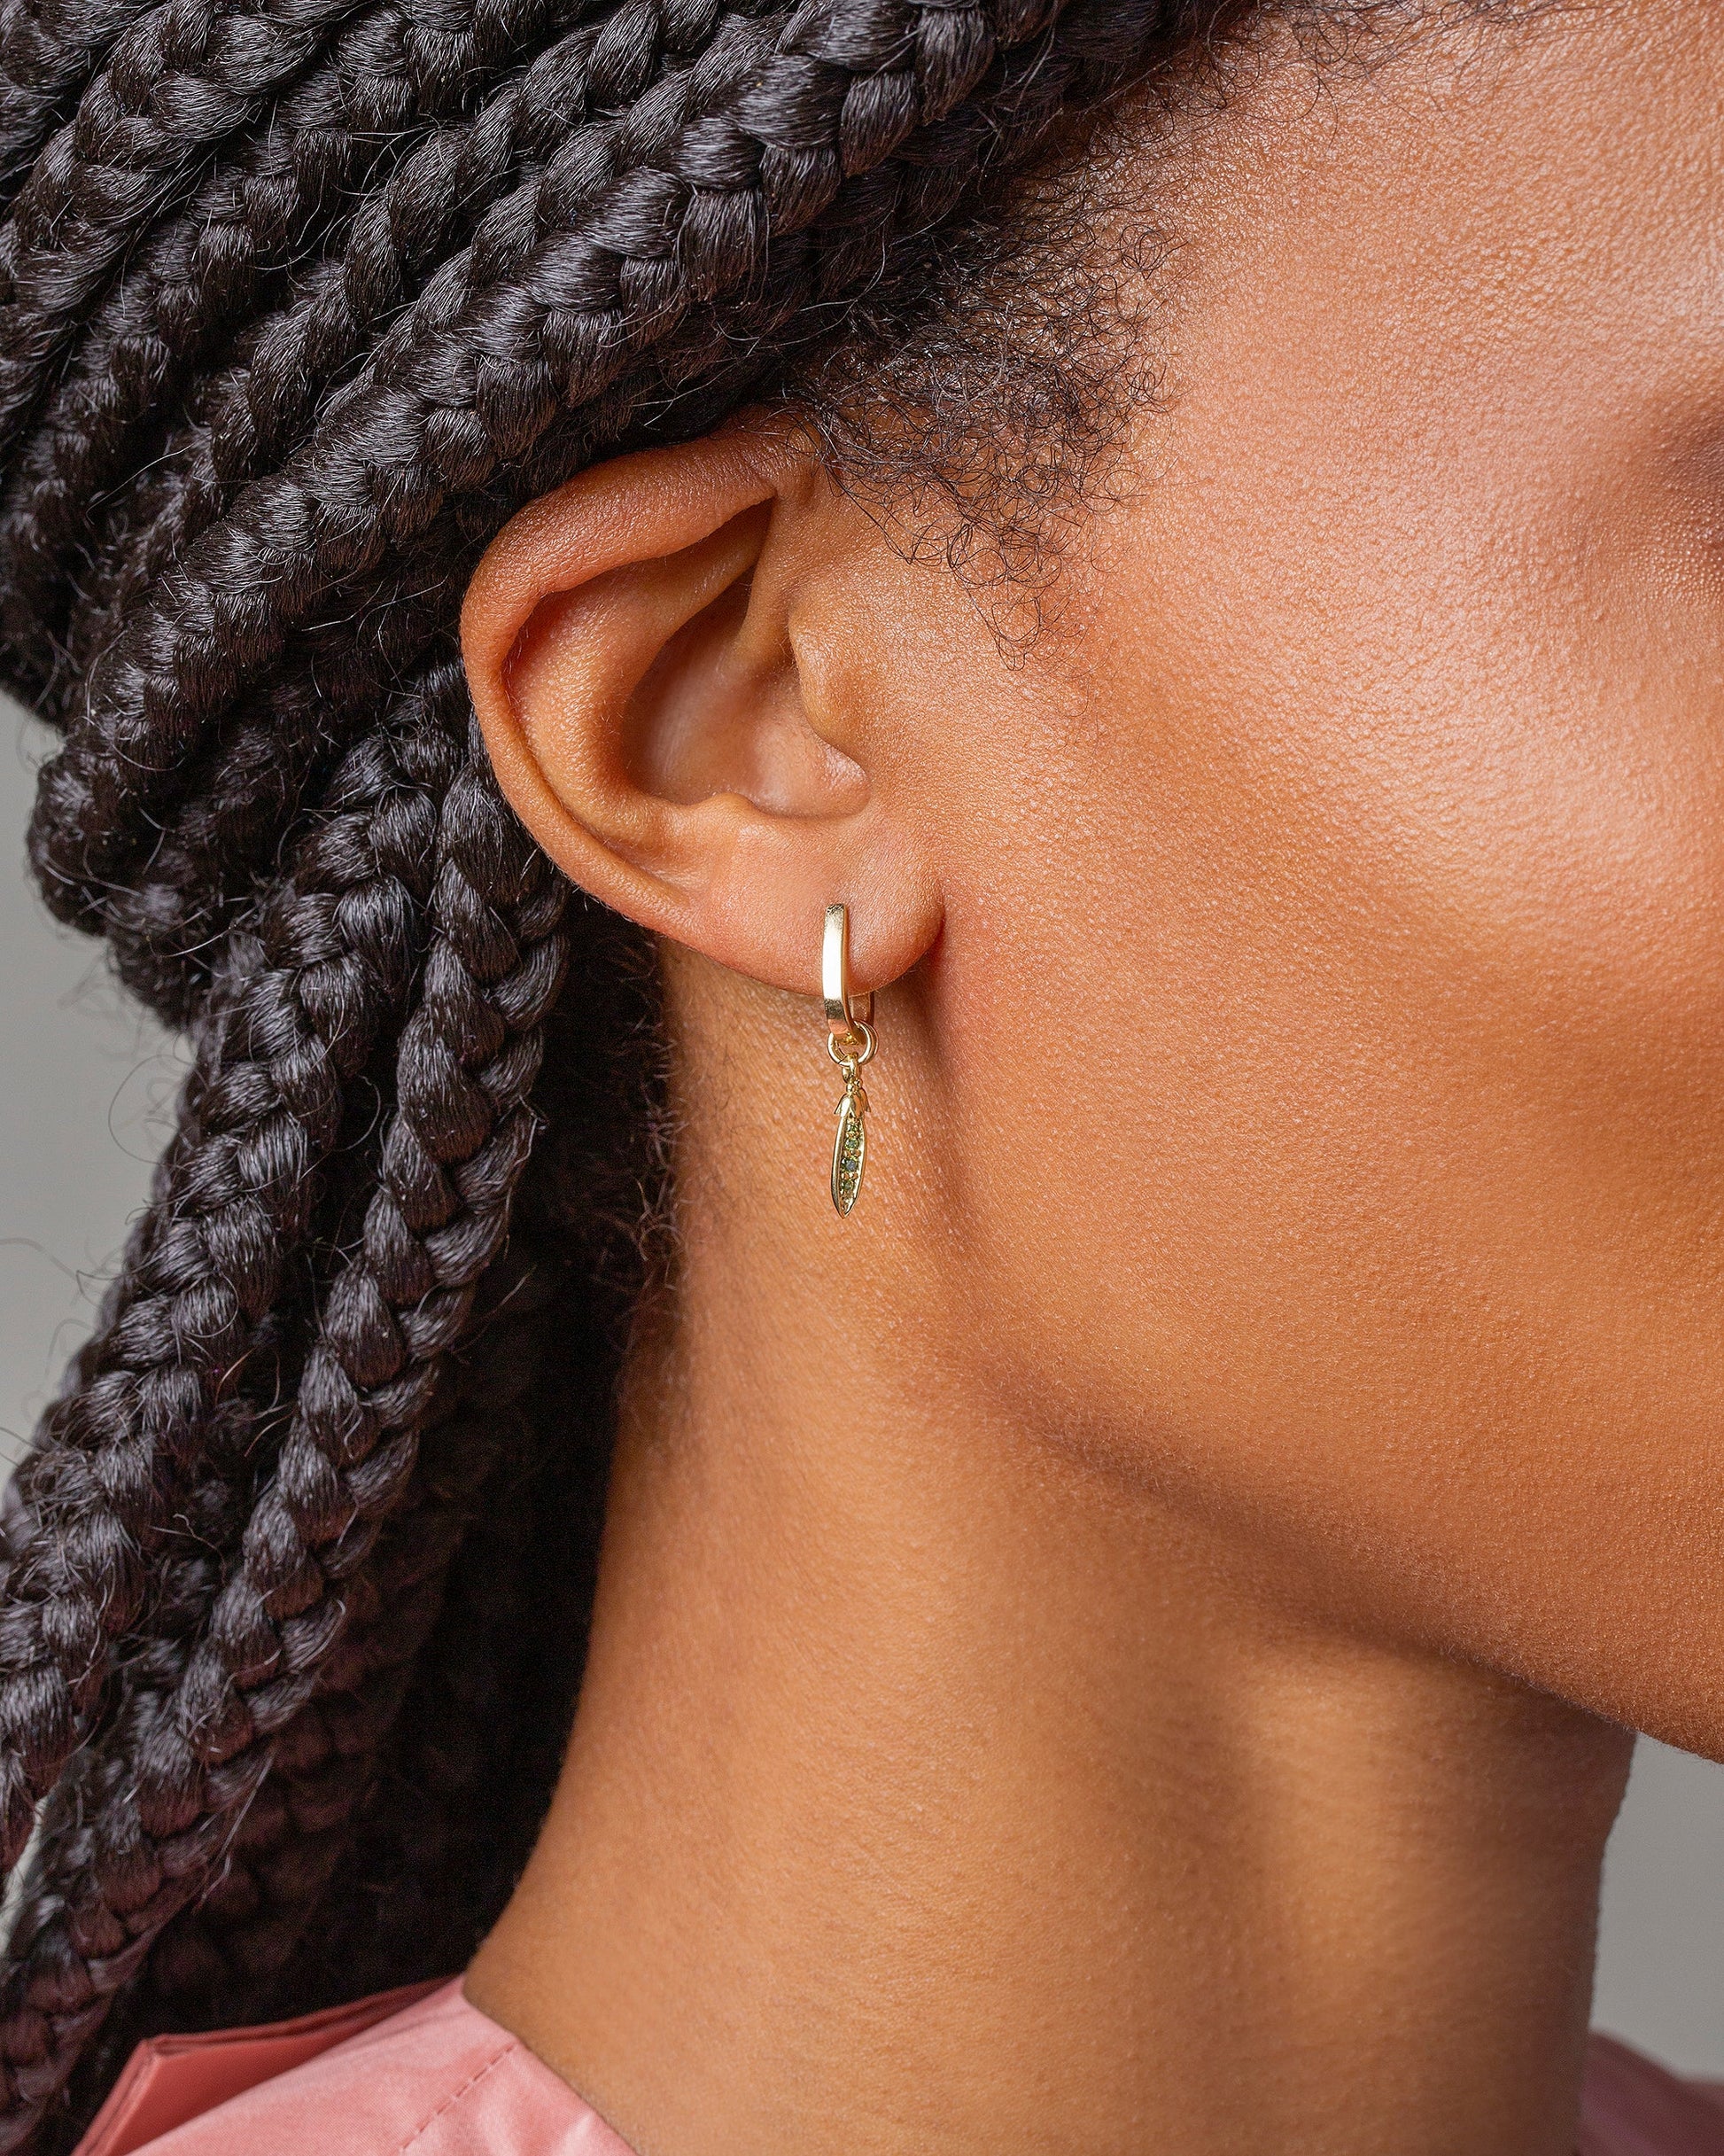 Snap Pea Charm show earring, worn by model.